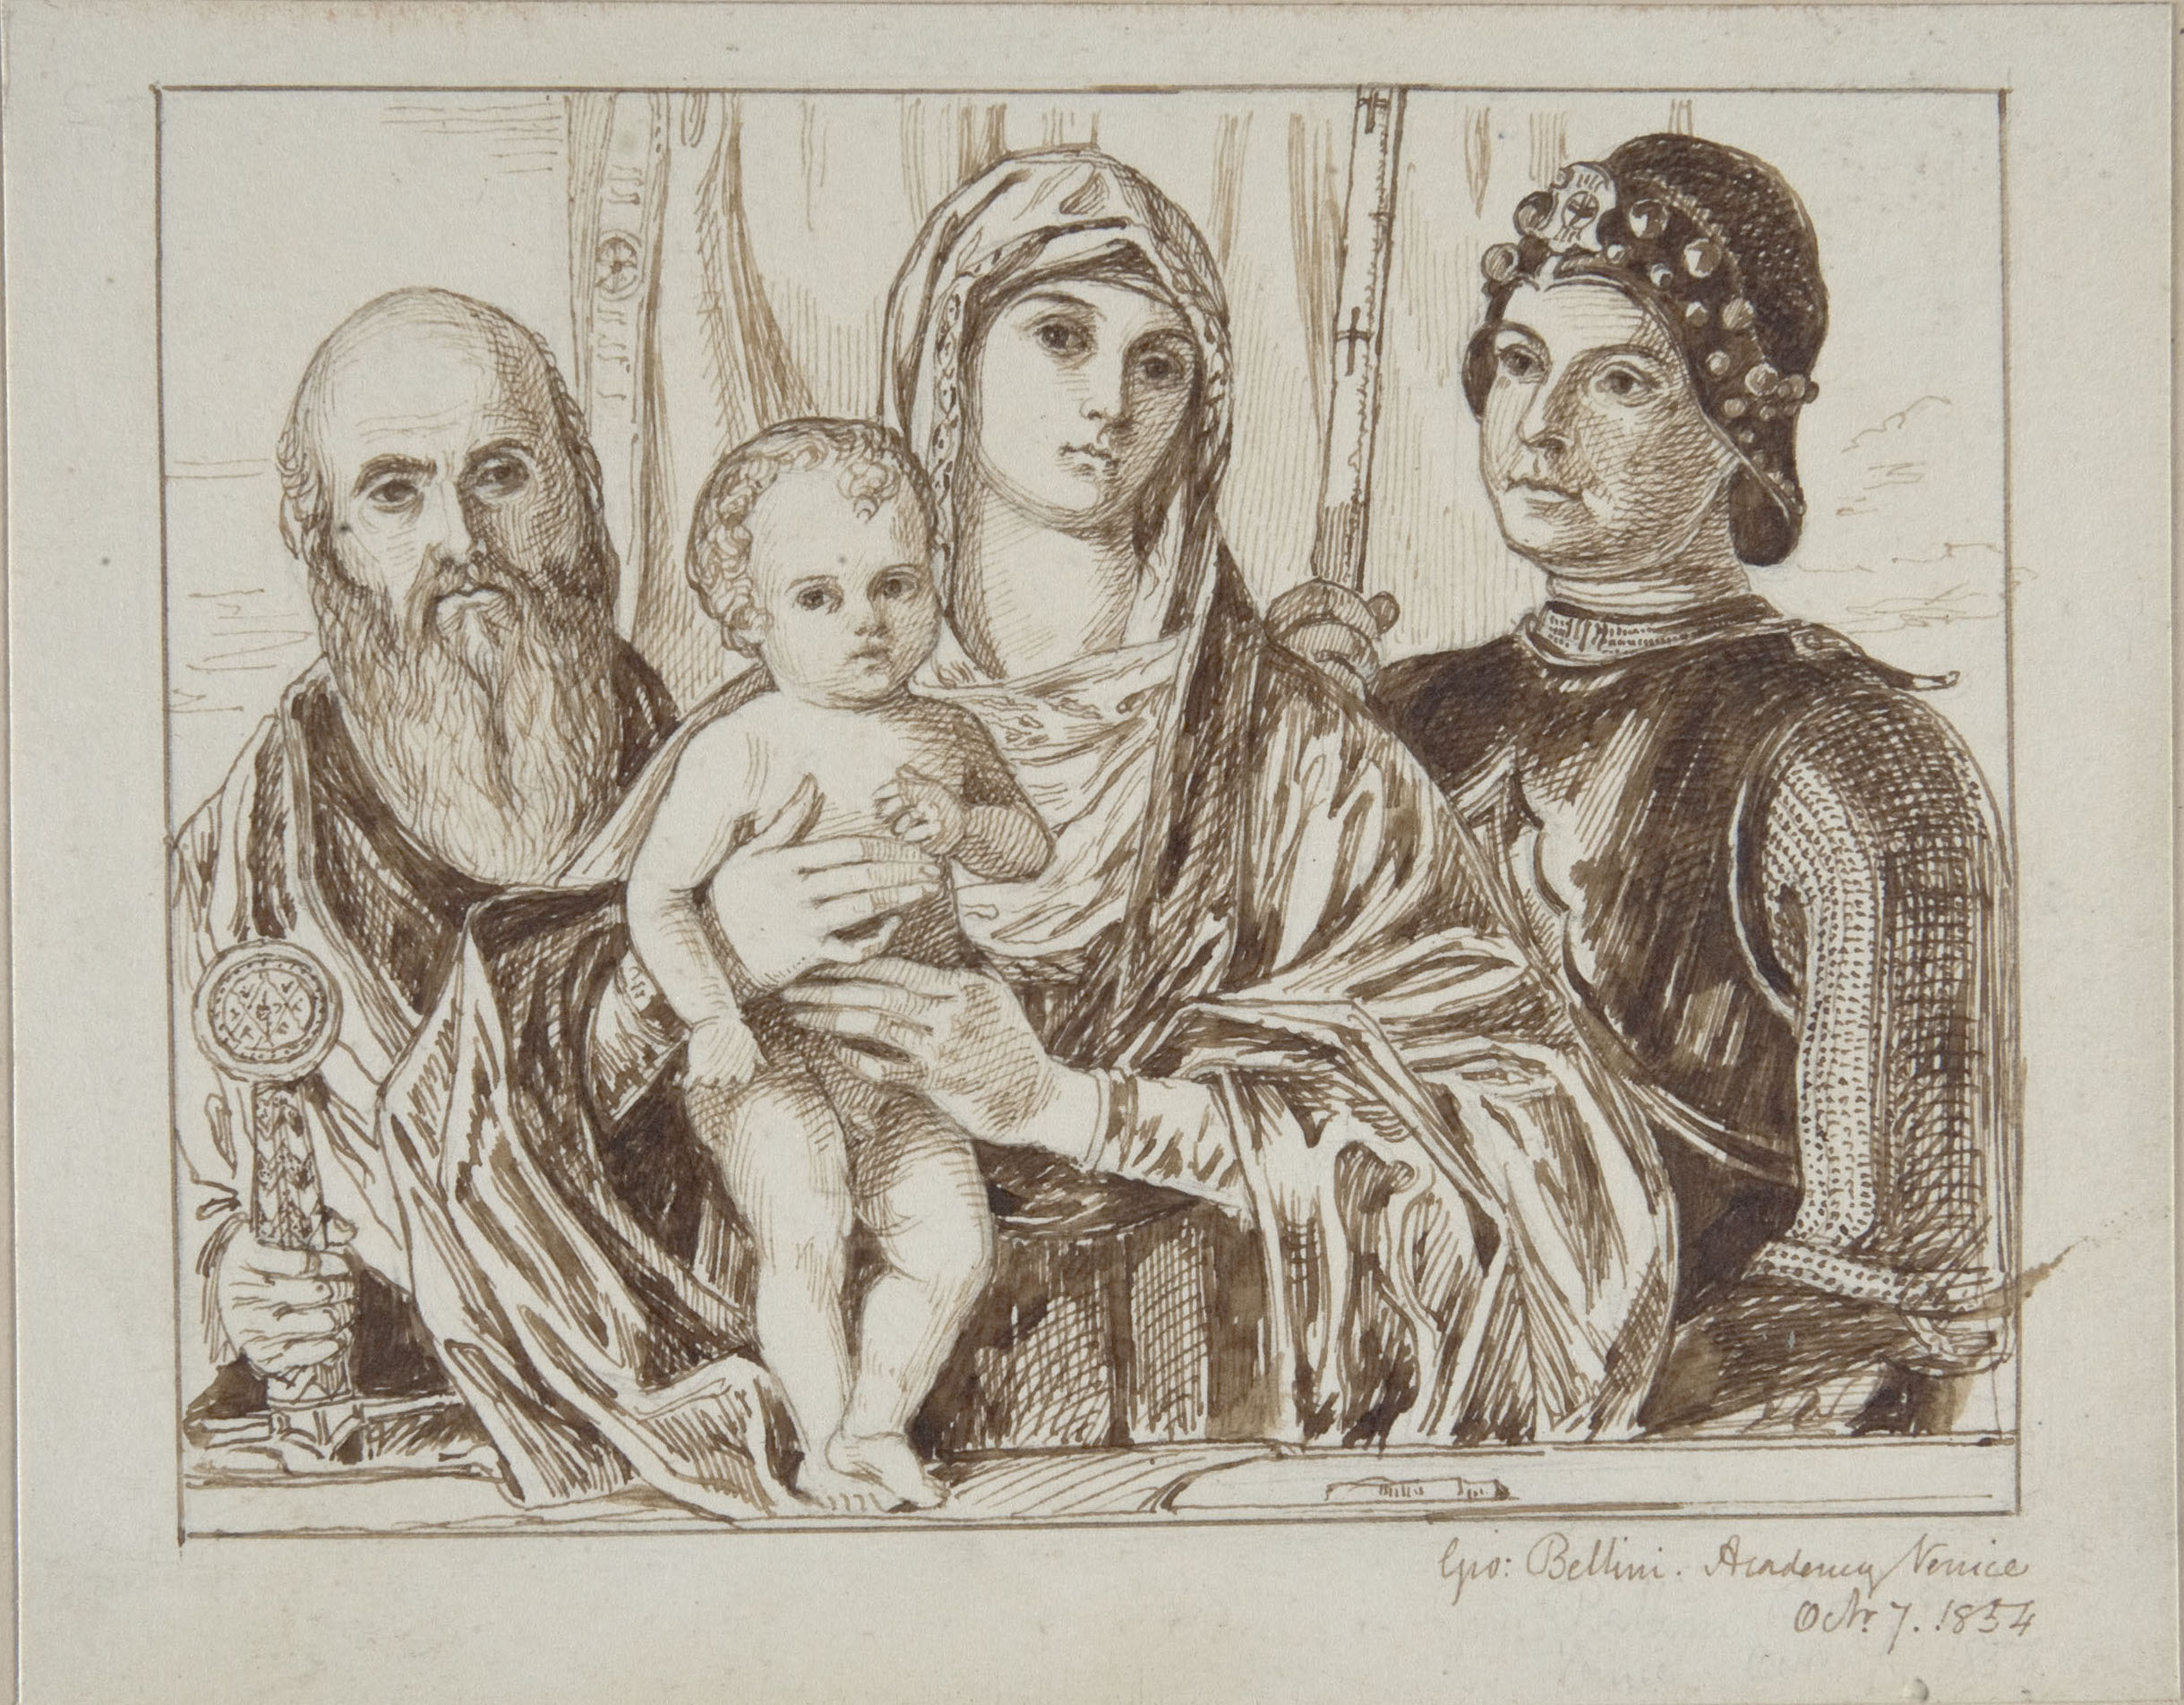 ‘Such a pleasant little sketch […] of this irritable artist’: Julia Cartwright and the Reception of Andrea Mantegna in Late Nineteenth-Century Britain